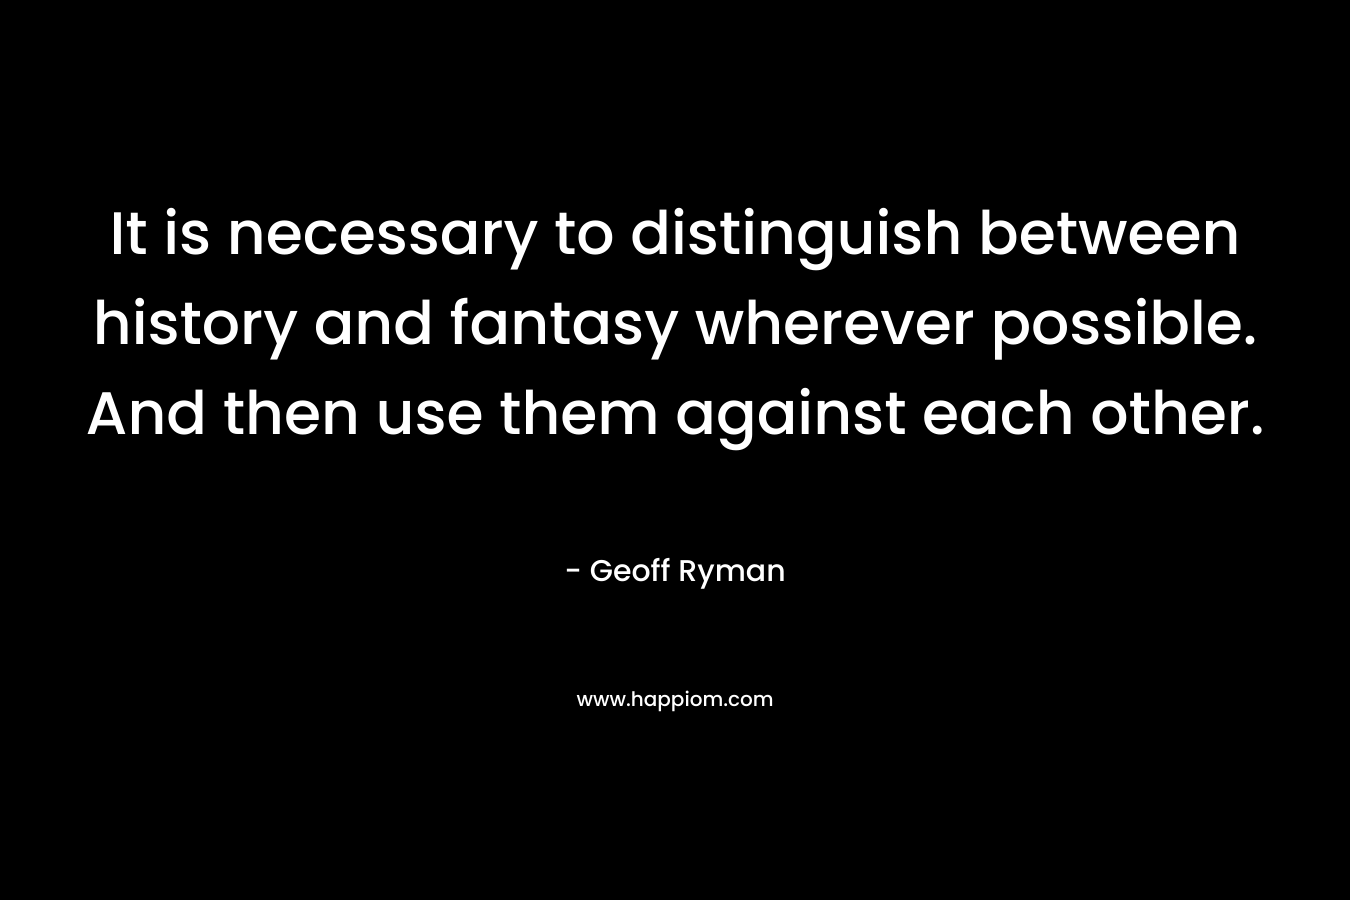 It is necessary to distinguish between history and fantasy wherever possible. And then use them against each other. – Geoff Ryman